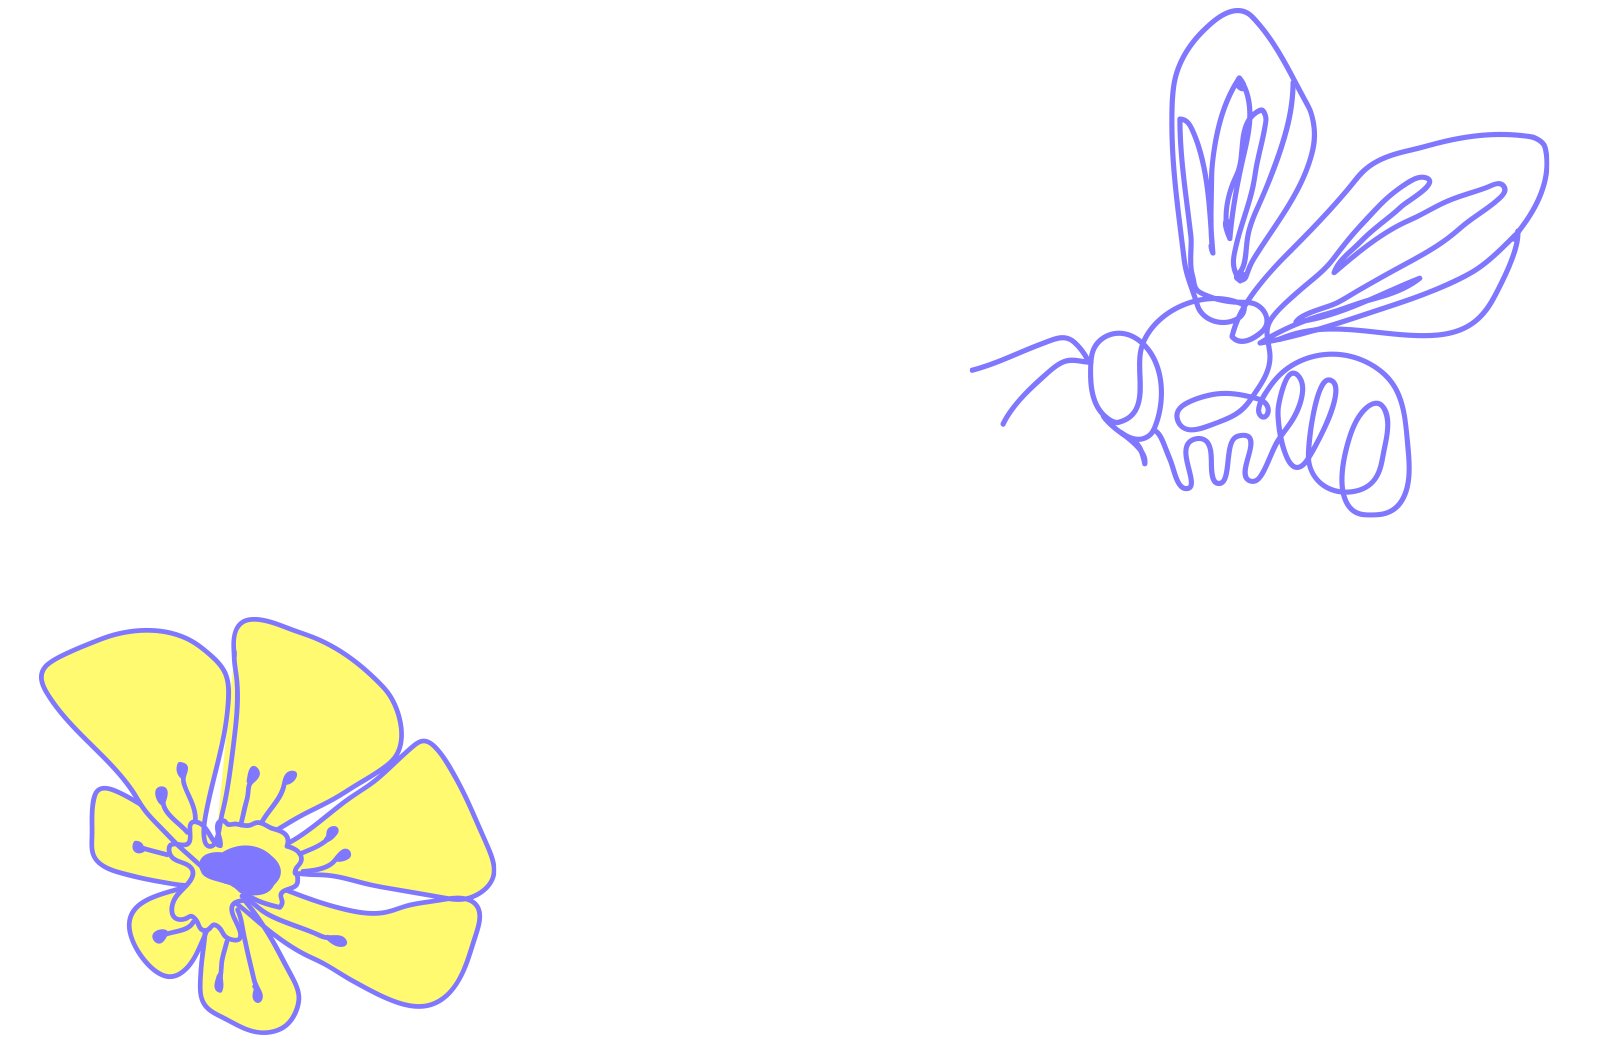 illustration-of-flower-and-bee-symbolizing-visual-communication-attracting-customers